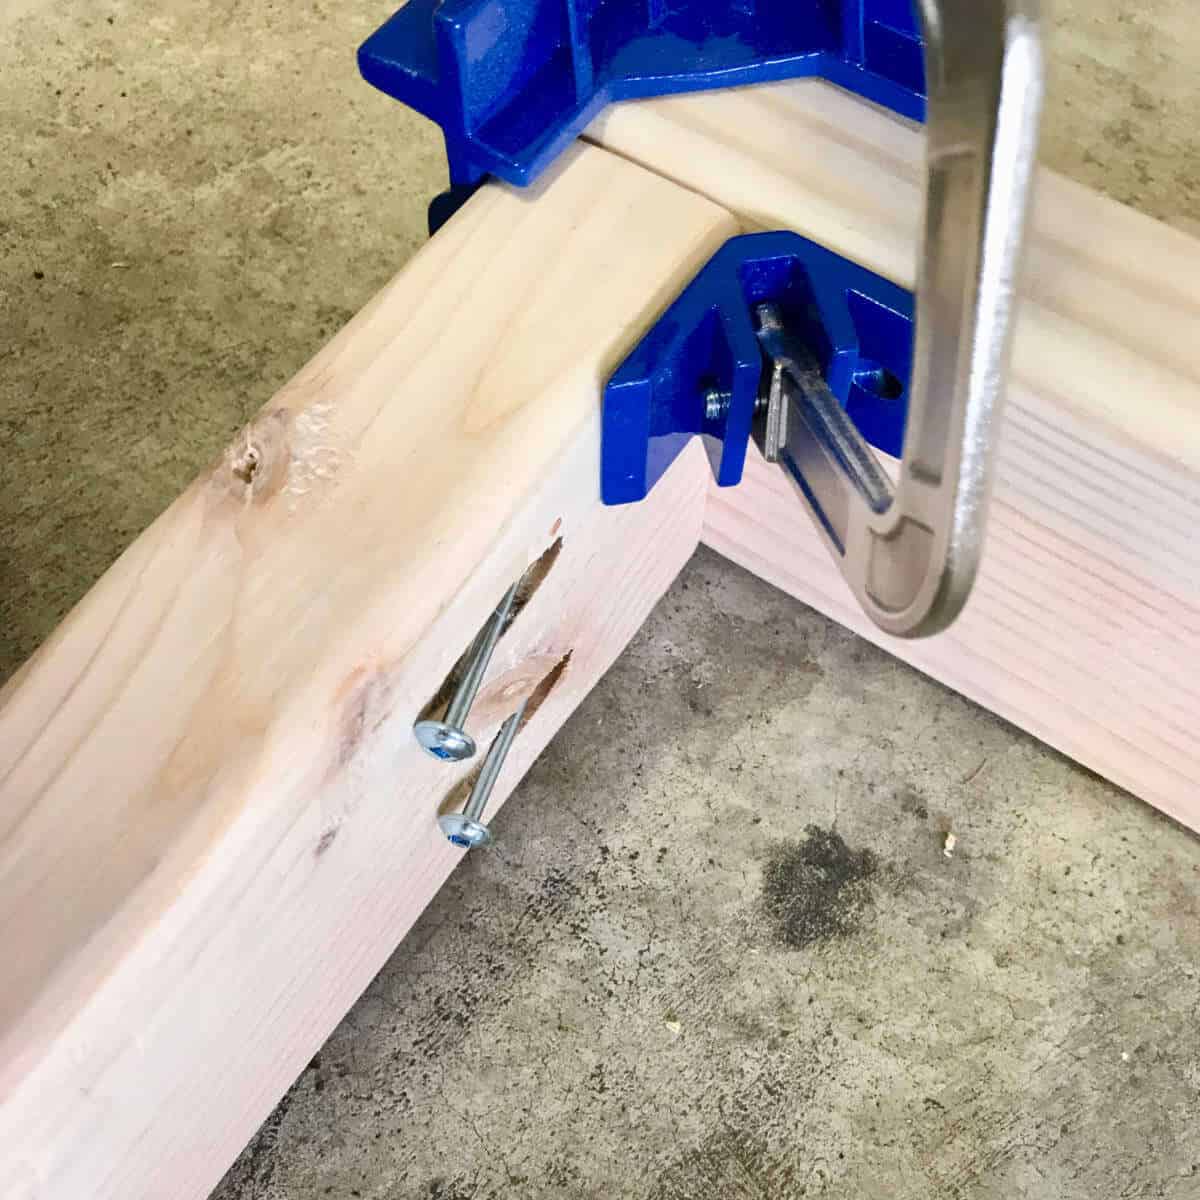 Corner clamp on two pieces of 2 x 4 so they can be joined.